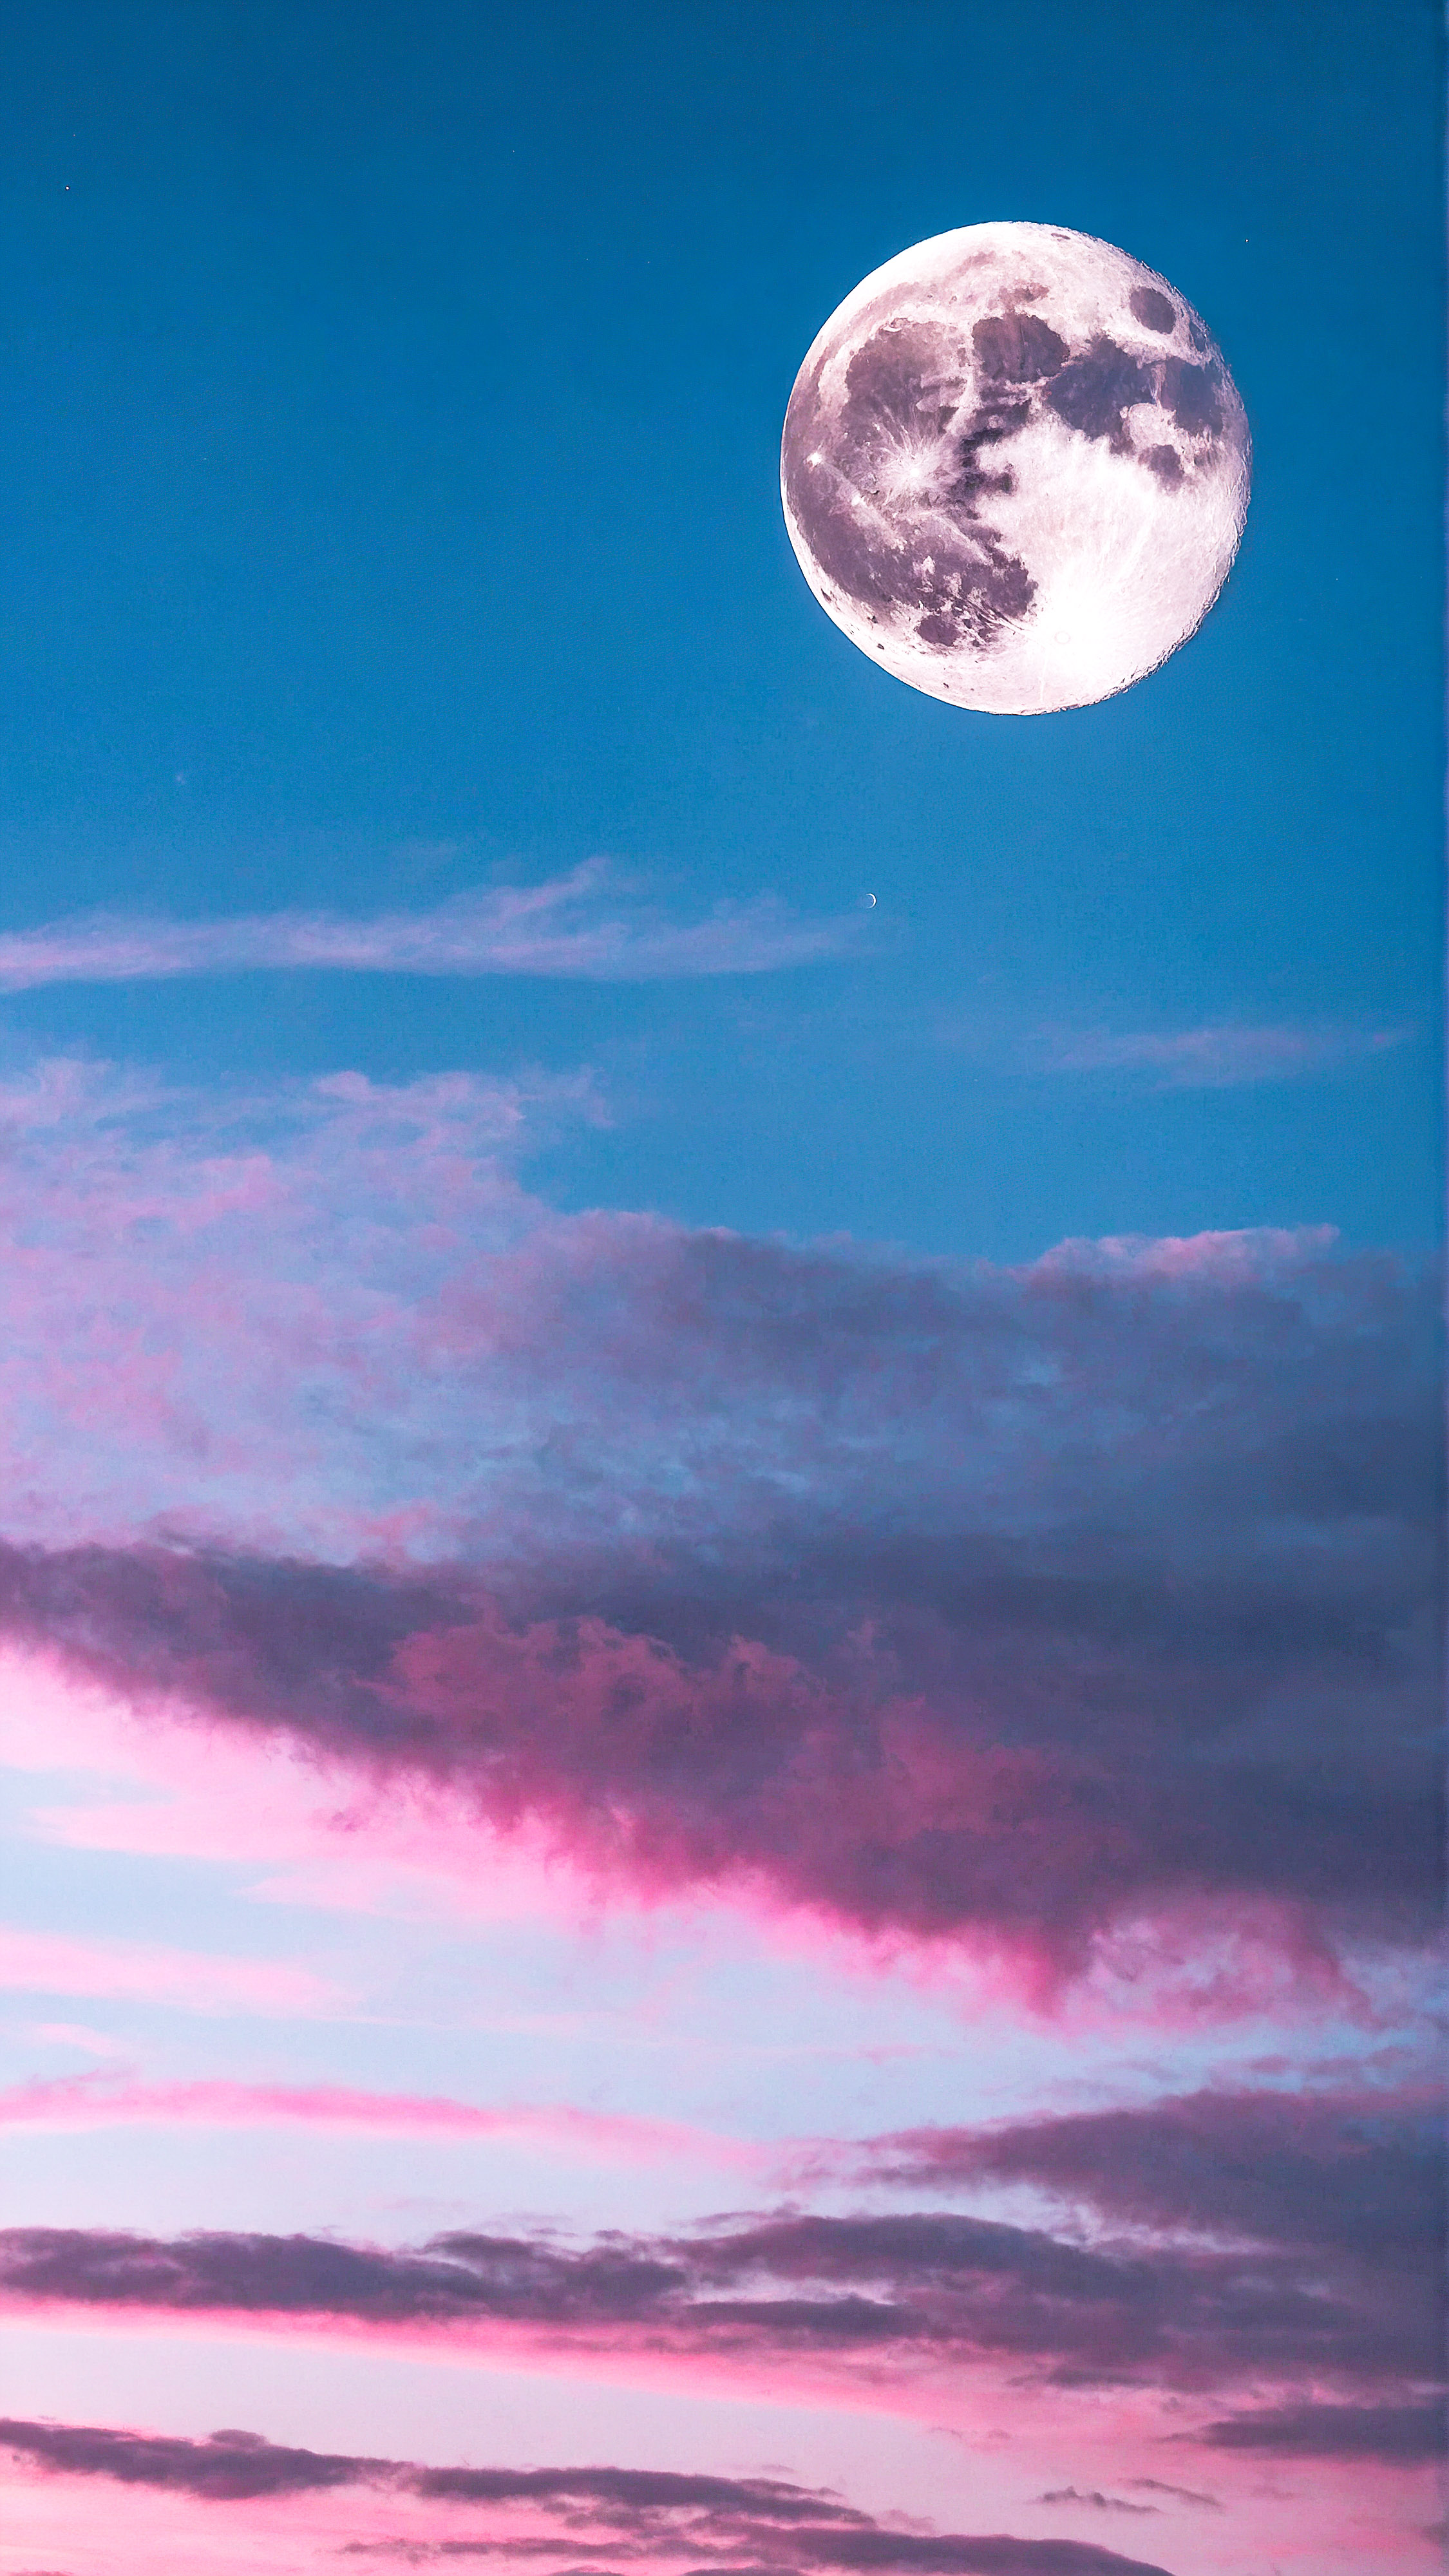 Experience the tranquility of a sky transitioning from blue to pink with fluffy clouds and a clear full moon with our cute iPhone screensaver.